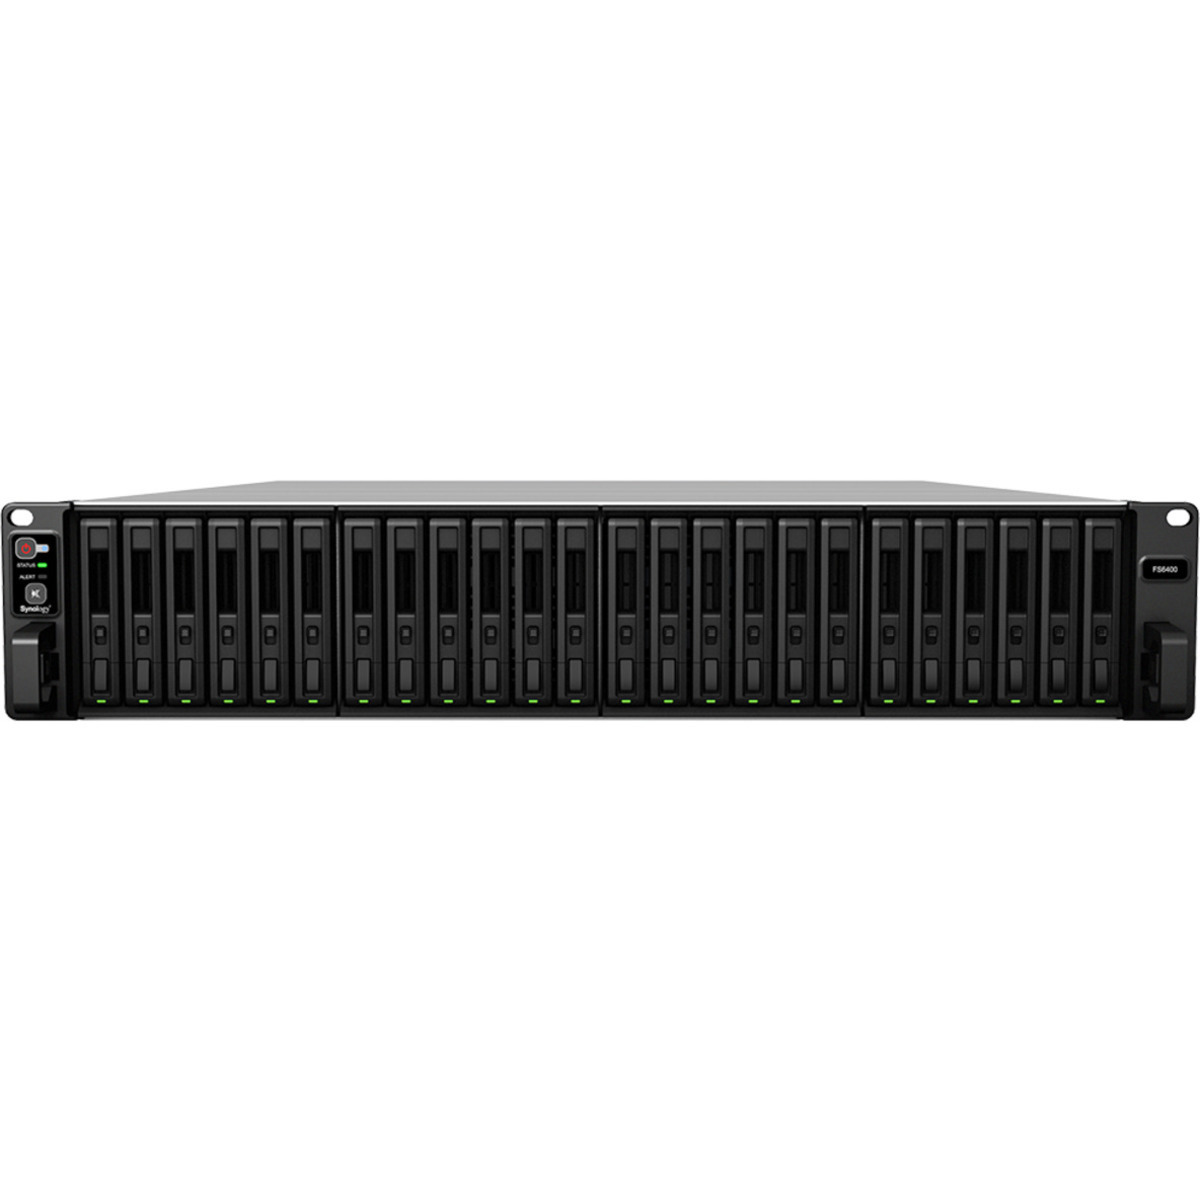 Synology FlashStation FS6400 80.6tb 24-Bay RackMount Large Business / Enterprise NAS - Network Attached Storage Device 21x3.8tb Synology SAT5210 Series SAT5210-3840G 2.5 530/500MB/s SATA 6Gb/s SSD ENTERPRISE Class Drives Installed - Burn-In Tested FlashStation FS6400